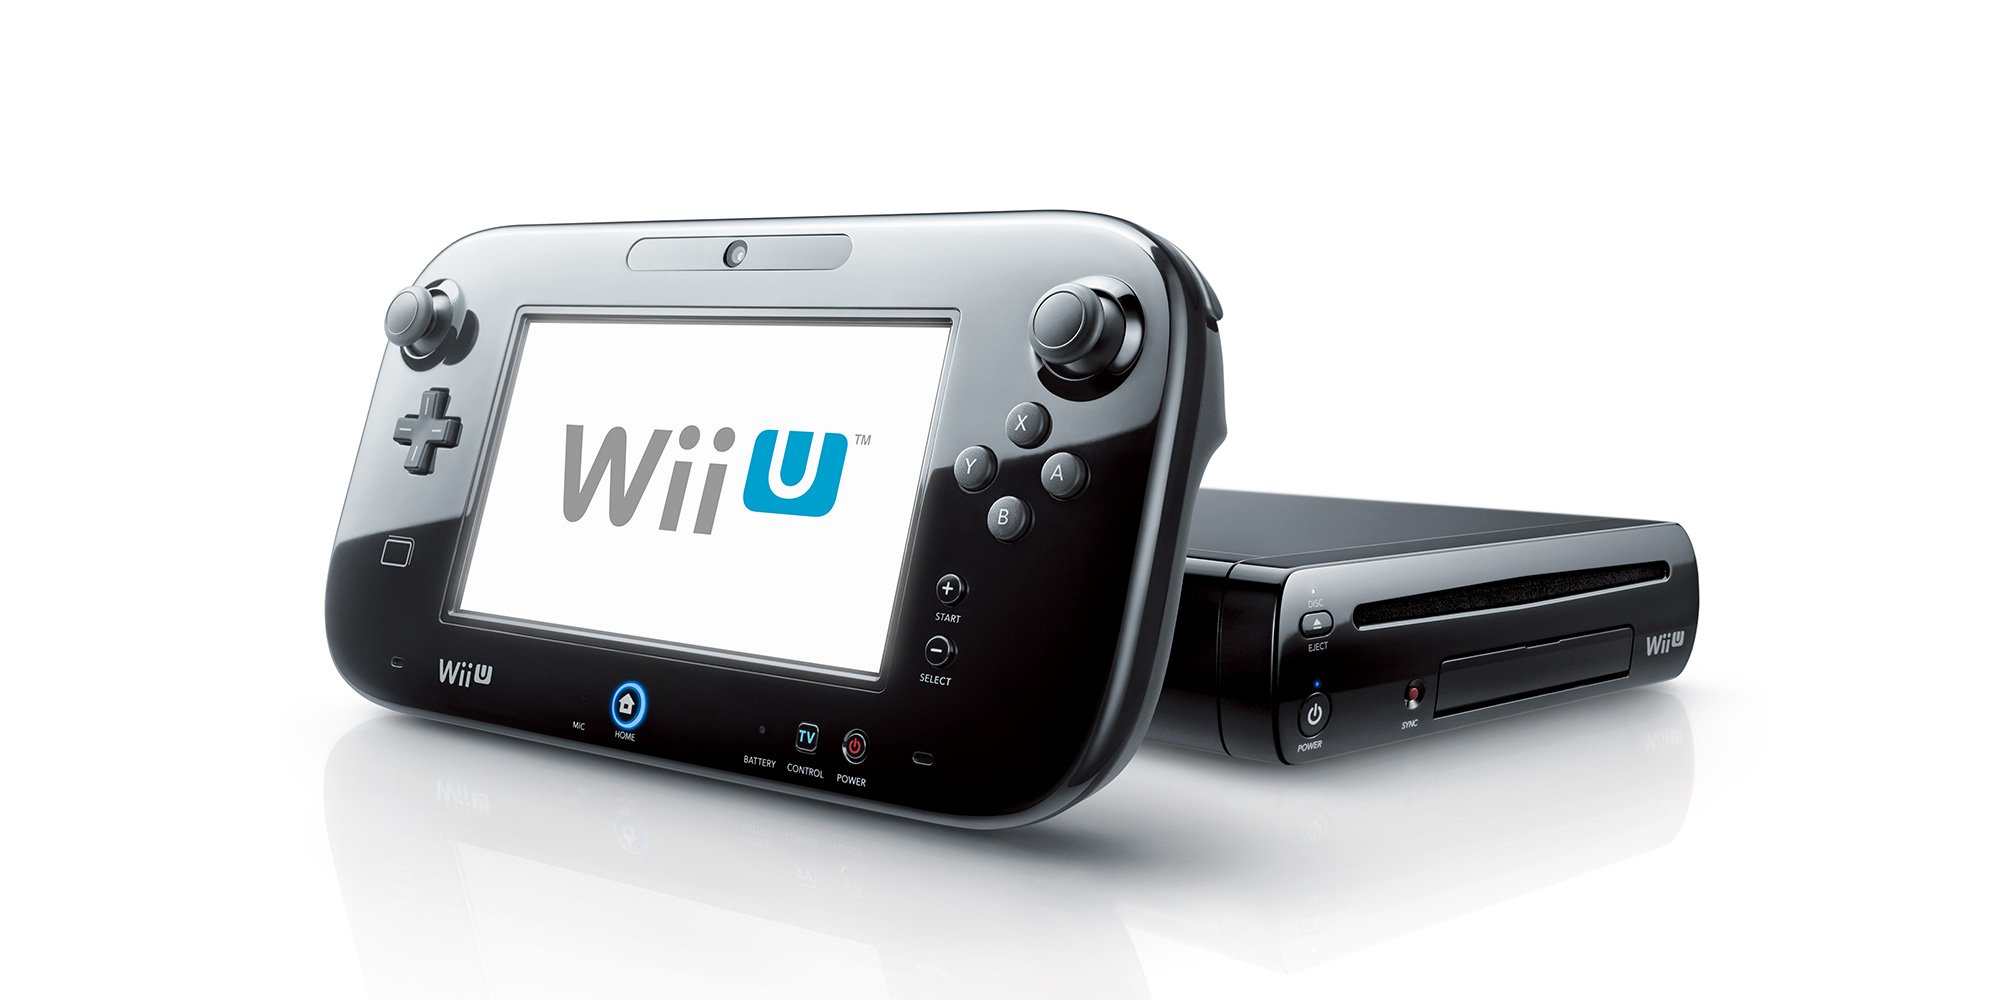 These are the 1,000 digital-only 3DS and Wii U games disappearing next week